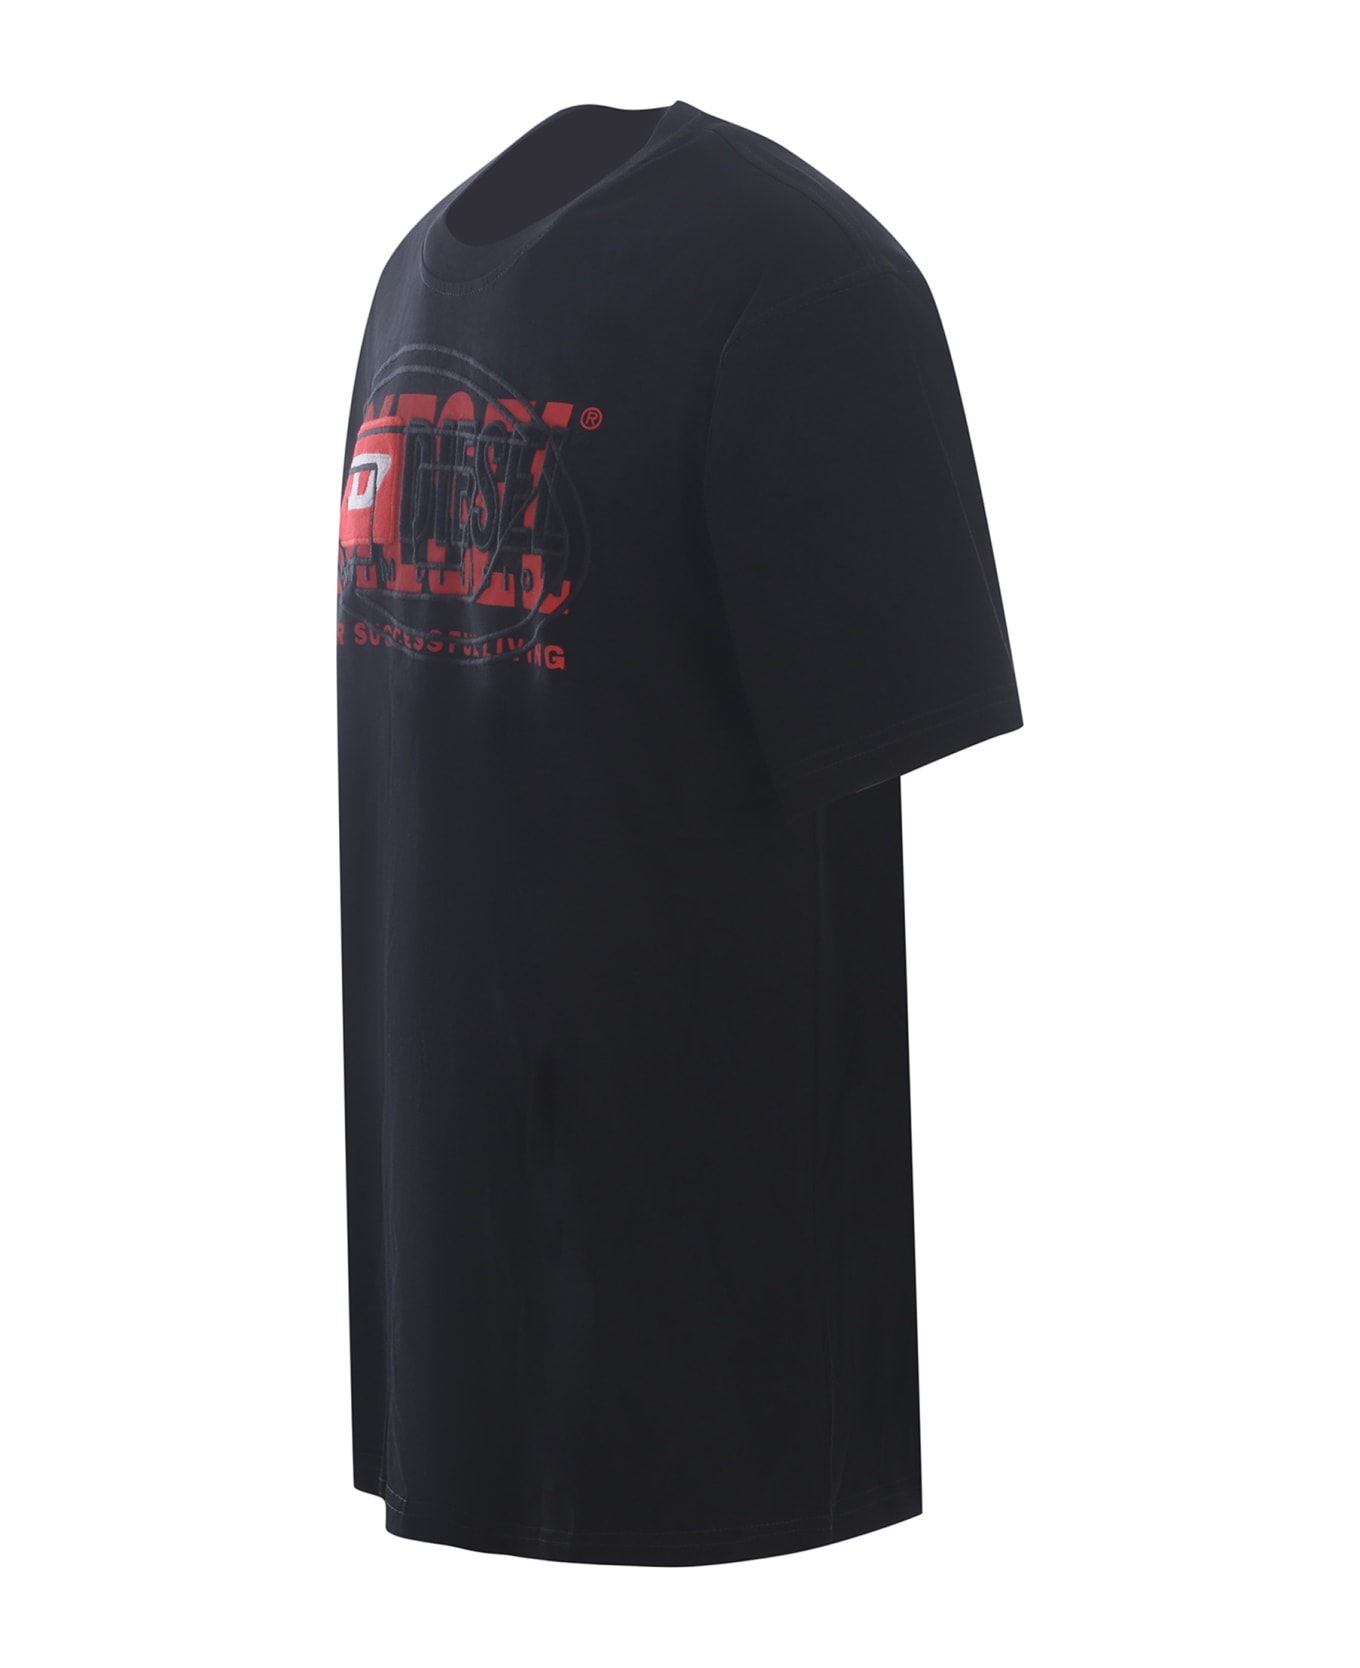 Diesel T-shirt Diesel "t-boxt" Made Of Cotton Jersey - Nero